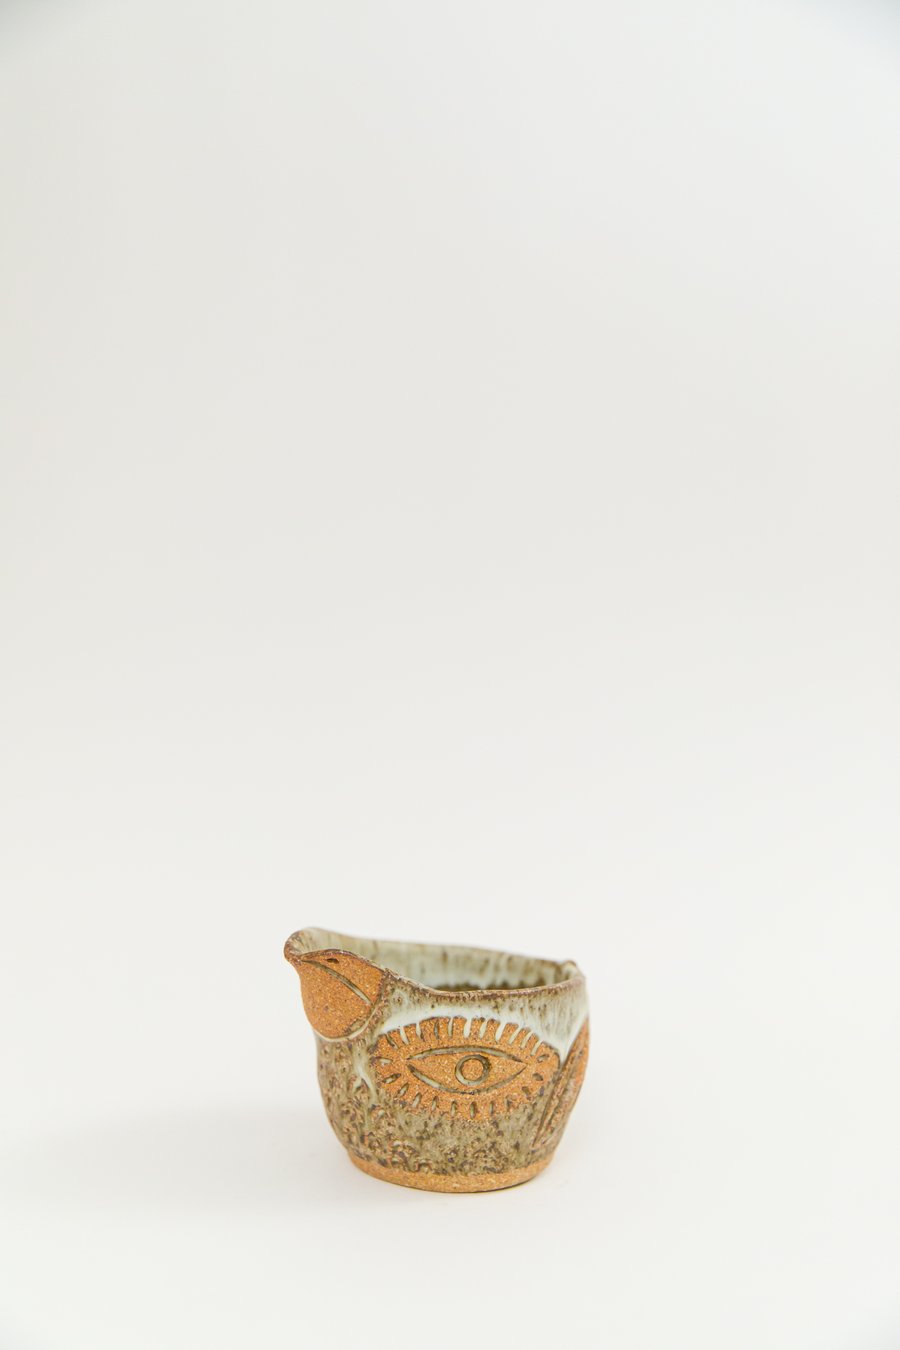 Image of Milky Almond Eyed Speckled Bird Bowl